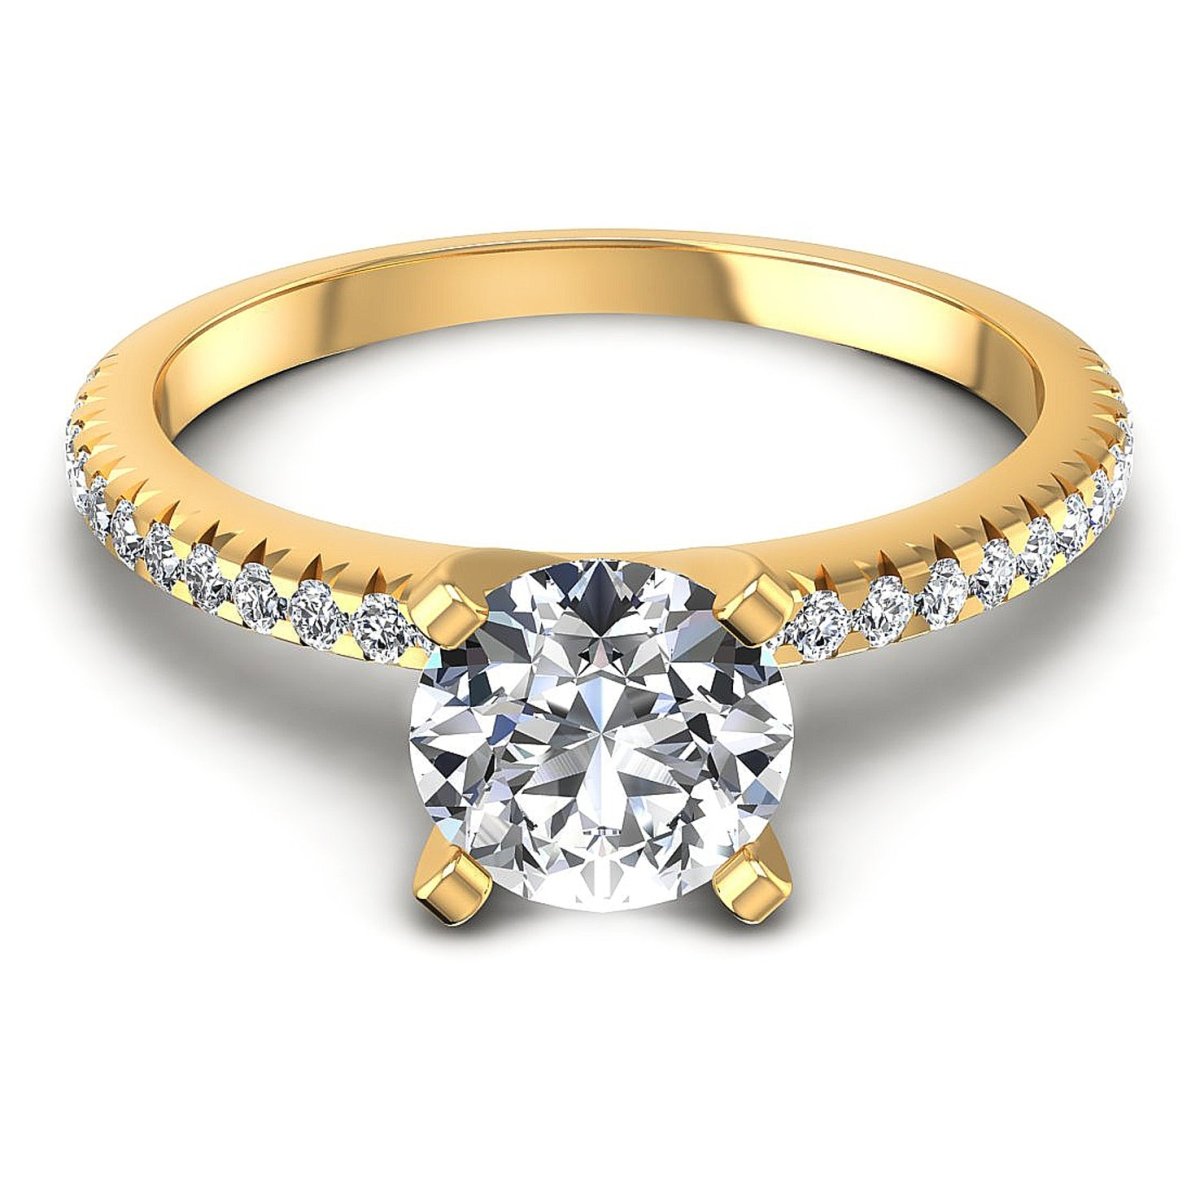 Special 1.00 CT Round Cut Diamond Engagement Ring in 14KT Yellow Gold - Primestyle.com